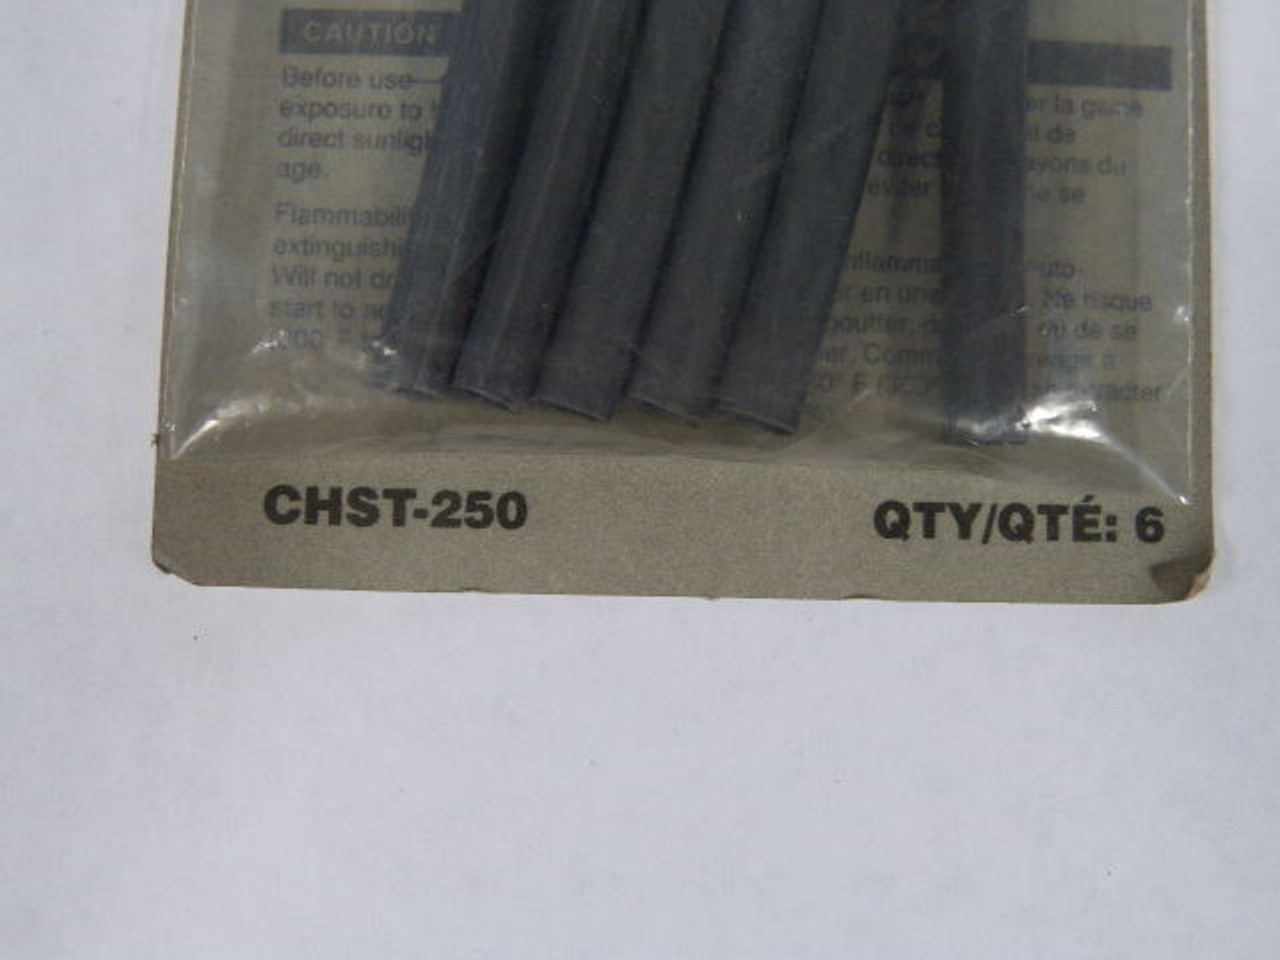 GB CHST-250 Heat Shrink Tubing 1/4" to 1/8" Bag of 6 ! NEW !